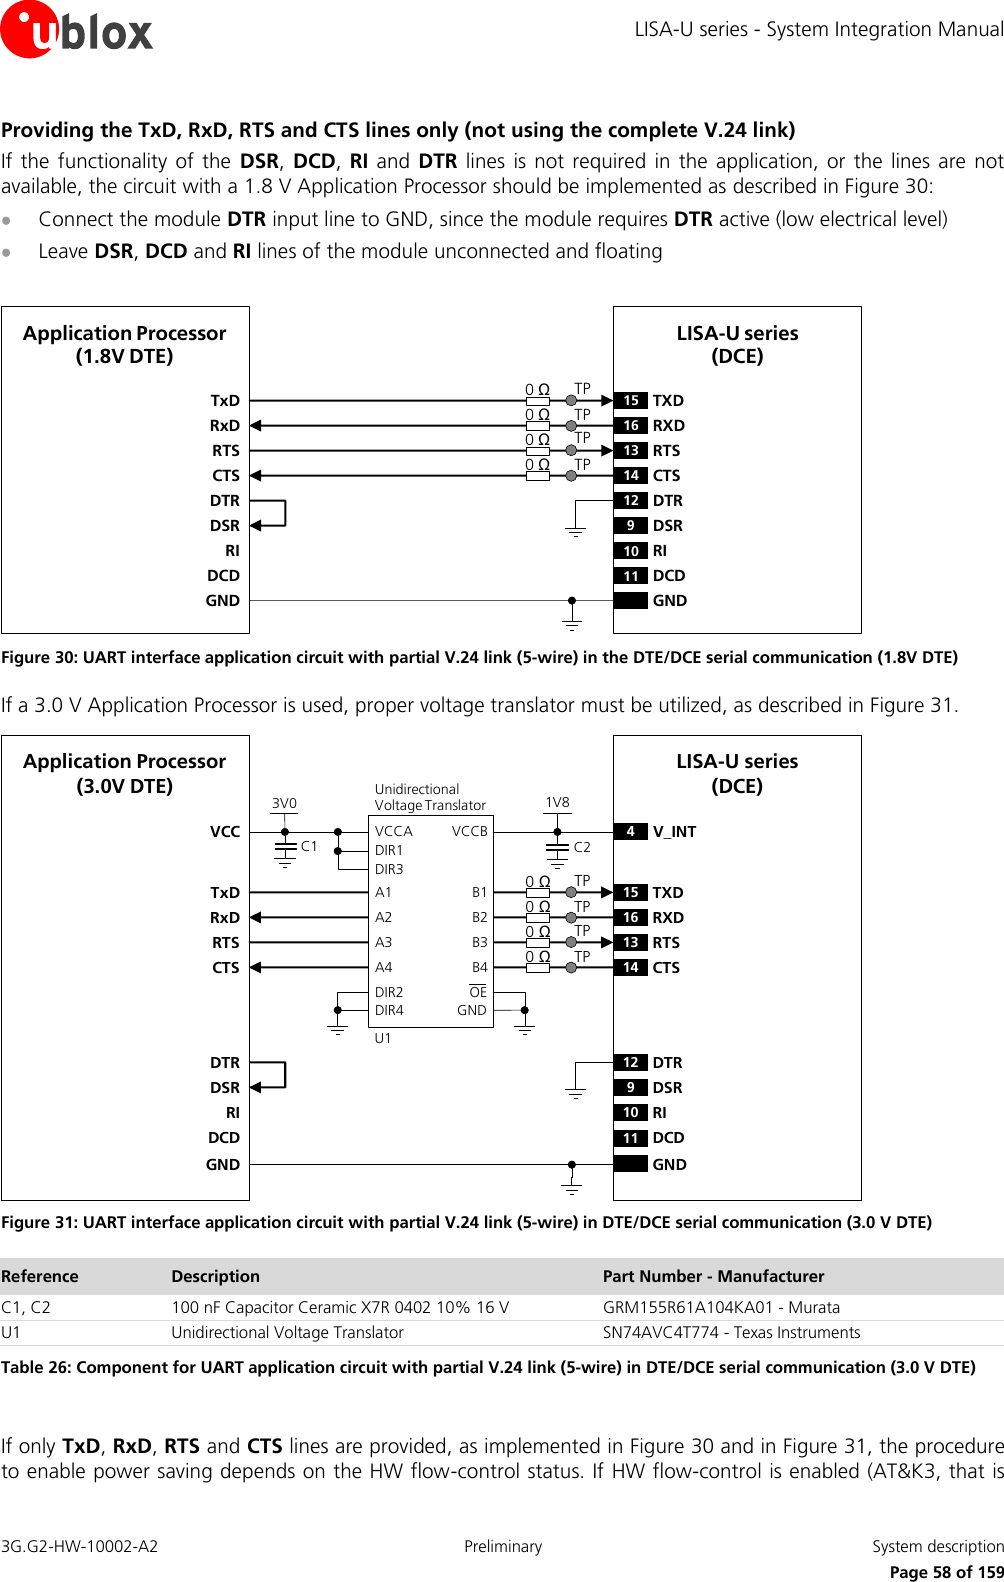 LISA-U series - System Integration Manual 3G.G2-HW-10002-A2  Preliminary  System description      Page 58 of 159 Providing the TxD, RxD, RTS and CTS lines only (not using the complete V.24 link) If the  functionality of  the  DSR, DCD,  RI and  DTR lines is not  required in the  application, or  the lines are  not available, the circuit with a 1.8 V Application Processor should be implemented as described in Figure 30:  Connect the module DTR input line to GND, since the module requires DTR active (low electrical level)  Leave DSR, DCD and RI lines of the module unconnected and floating  TxDApplication Processor(1.8V DTE)RxDRTSCTSDTRDSRRIDCDGNDLISA-U series (DCE)15 TXD12 DTR16 RXD13 RTS14 CTS9DSR10 RI11 DCDGND0 Ω0 ΩTPTP0 Ω0 ΩTPTP Figure 30: UART interface application circuit with partial V.24 link (5-wire) in the DTE/DCE serial communication (1.8V DTE) If a 3.0 V Application Processor is used, proper voltage translator must be utilized, as described in Figure 31. 4V_INTTxDApplication Processor(3.0V DTE)RxDRTSCTSDTRDSRRIDCDGNDLISA-U series (DCE)15 TXD12 DTR16 RXD13 RTS14 CTS9DSR10 RI11 DCDGND0 Ω0 ΩTPTP0 Ω0 ΩTPTP1V8B1 A1GNDU1B3A3VCCBVCCAUnidirectionalVoltage TranslatorC1 C23V0DIR3DIR2 OEDIR1VCCB2 A2B4A4DIR4 Figure 31: UART interface application circuit with partial V.24 link (5-wire) in DTE/DCE serial communication (3.0 V DTE) Reference Description Part Number - Manufacturer C1, C2 100 nF Capacitor Ceramic X7R 0402 10% 16 V GRM155R61A104KA01 - Murata U1 Unidirectional Voltage Translator SN74AVC4T774 - Texas Instruments Table 26: Component for UART application circuit with partial V.24 link (5-wire) in DTE/DCE serial communication (3.0 V DTE)  If only TxD, RxD, RTS and CTS lines are provided, as implemented in Figure 30 and in Figure 31, the procedure to enable power saving depends on the HW flow-control status. If HW flow-control is enabled (AT&amp;K3, that is 